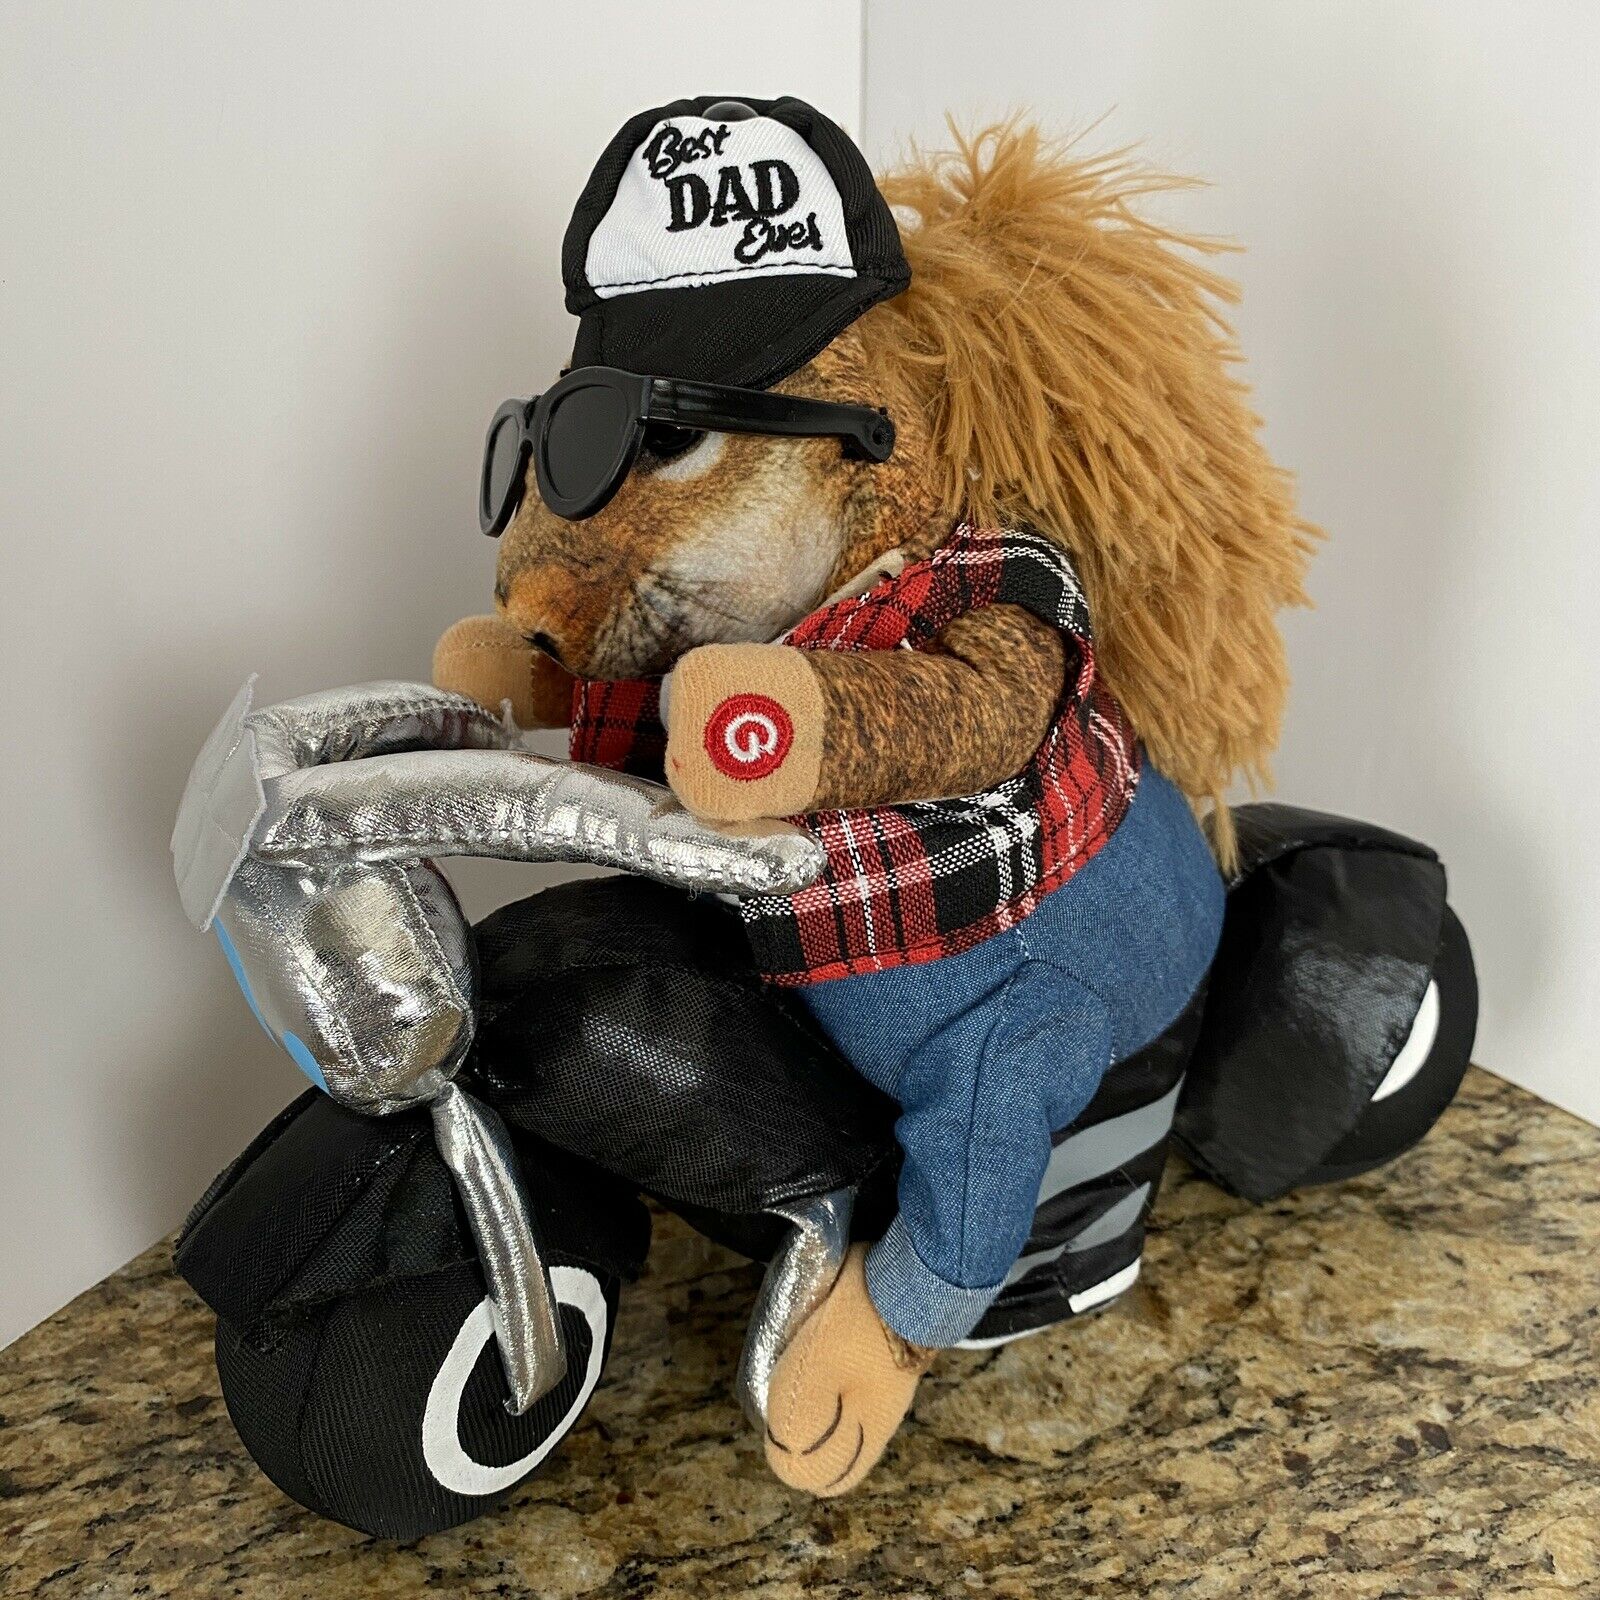 Gemmy "born To Be Wild" Dad Animated Squirrel Driving Motorcycle Animated Works